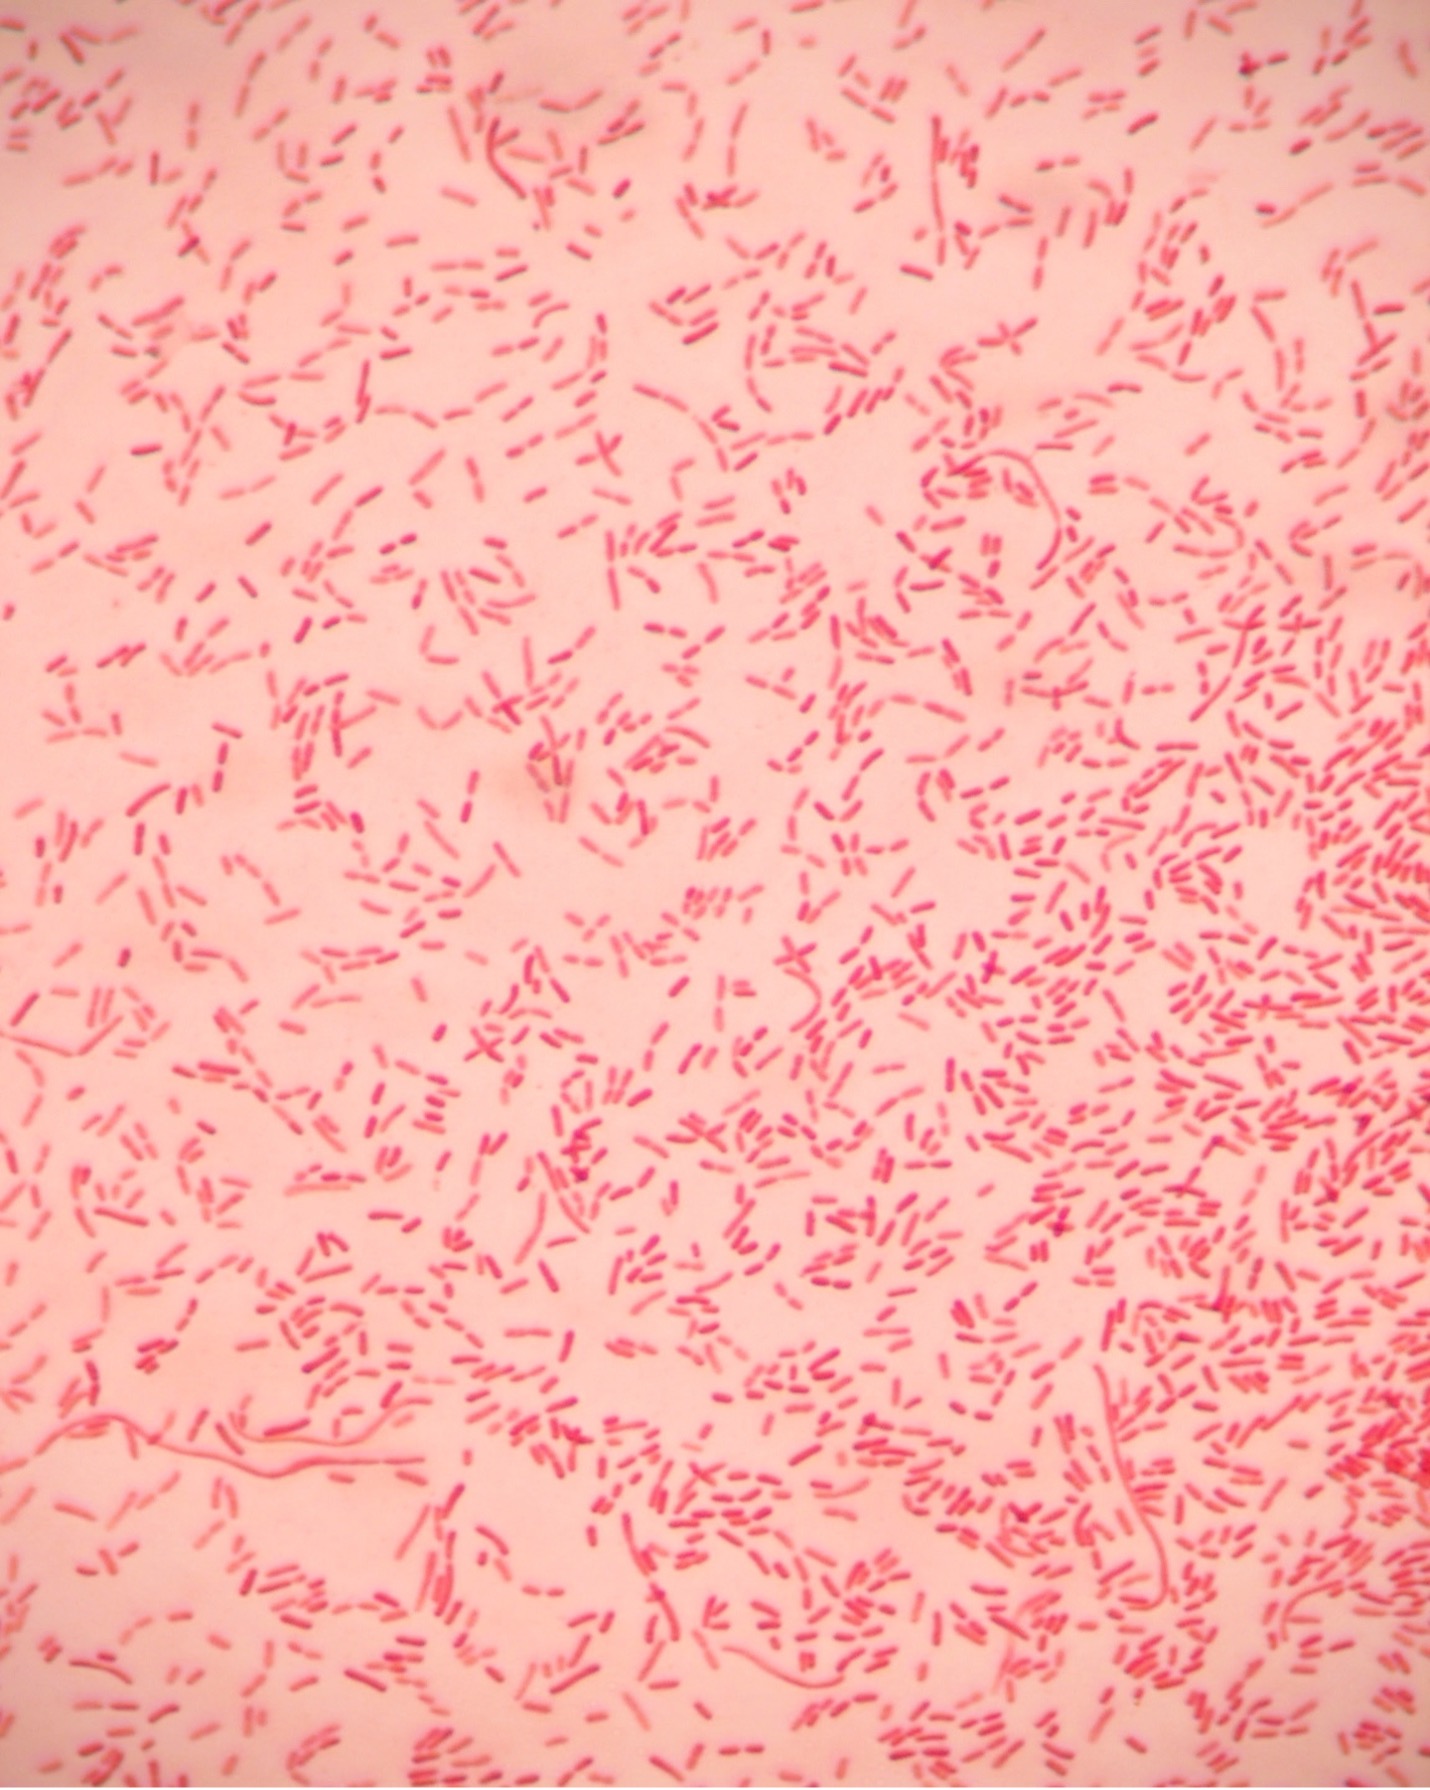 Gram stain exercise 9.4 - pink rods